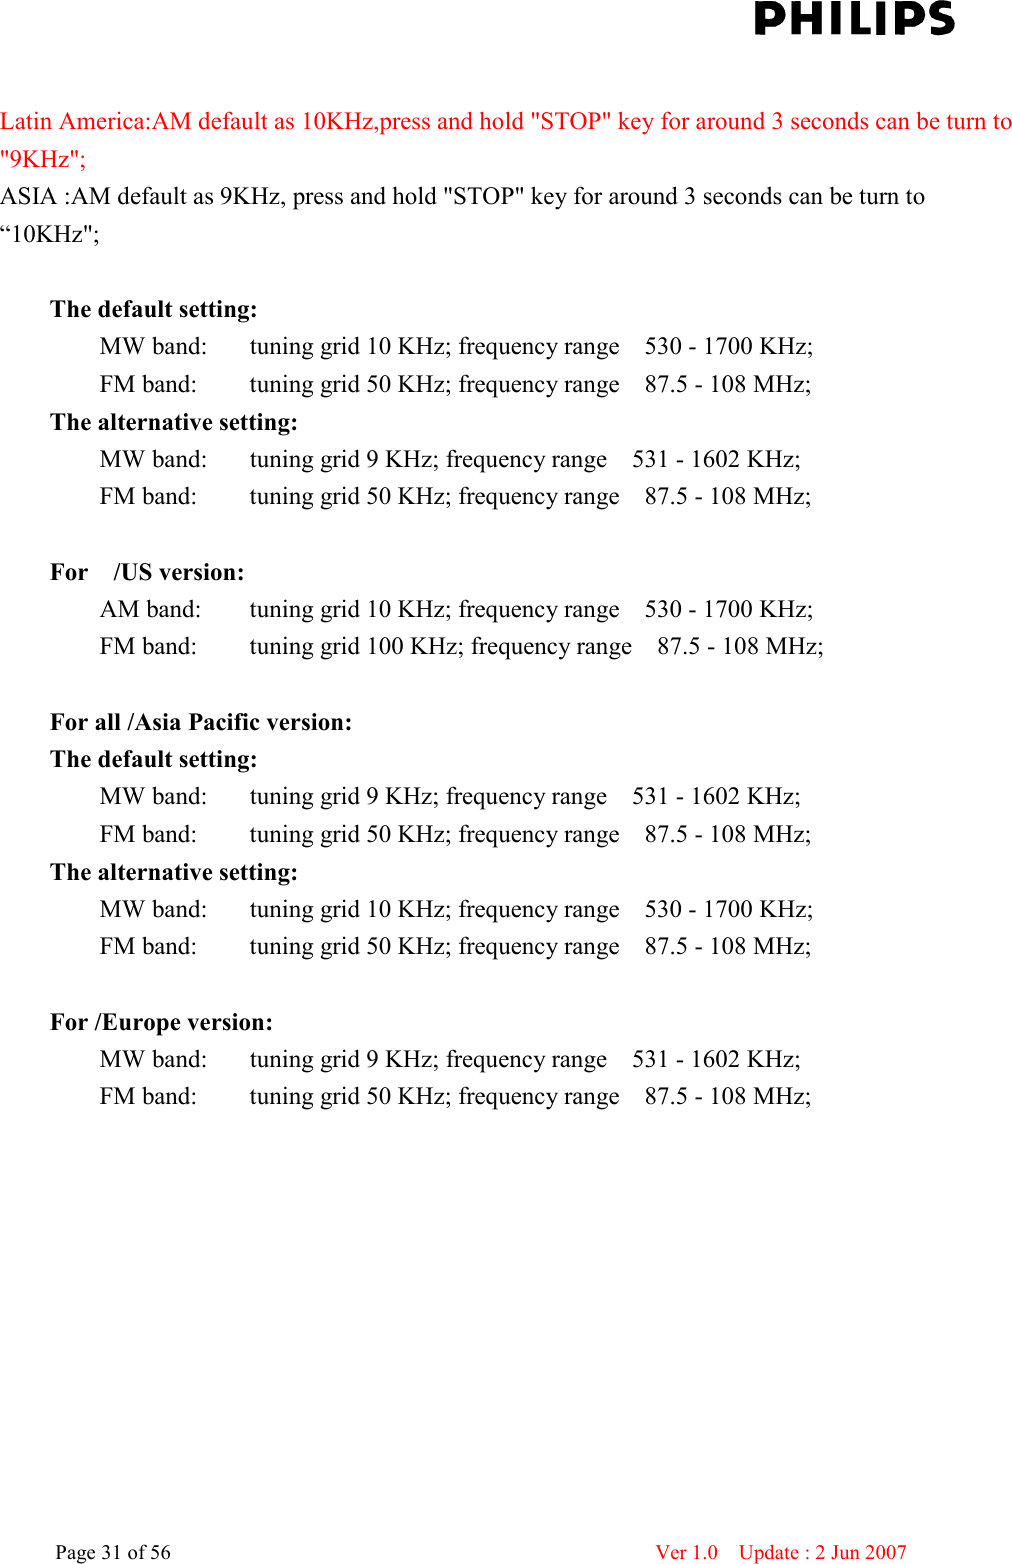    Page 31 of 56                      Ver 1.0    Update : 2 Jun 2007   Latin America:AM default as 10KHz,press and hold &quot;STOP&quot; key for around 3 seconds can be turn to &quot;9KHz&quot;; ASIA :AM default as 9KHz, press and hold &quot;STOP&quot; key for around 3 seconds can be turn to “10KHz&quot;;   The default setting:   MW band:  tuning grid 10 KHz; frequency range    530 - 1700 KHz;   FM band:   tuning grid 50 KHz; frequency range    87.5 - 108 MHz;   The alternative setting:   MW band:      tuning grid 9 KHz; frequency range    531 - 1602 KHz;   FM band:      tuning grid 50 KHz; frequency range    87.5 - 108 MHz;    For    /US version:   AM band:      tuning grid 10 KHz; frequency range    530 - 1700 KHz;   FM band:      tuning grid 100 KHz; frequency range    87.5 - 108 MHz;    For all /Asia Pacific version:   The default setting:   MW band:      tuning grid 9 KHz; frequency range    531 - 1602 KHz;   FM band:      tuning grid 50 KHz; frequency range    87.5 - 108 MHz;   The alternative setting:   MW band:      tuning grid 10 KHz; frequency range    530 - 1700 KHz;   FM band:      tuning grid 50 KHz; frequency range    87.5 - 108 MHz;    For /Europe version:   MW band:      tuning grid 9 KHz; frequency range    531 - 1602 KHz;   FM band:      tuning grid 50 KHz; frequency range    87.5 - 108 MHz;       